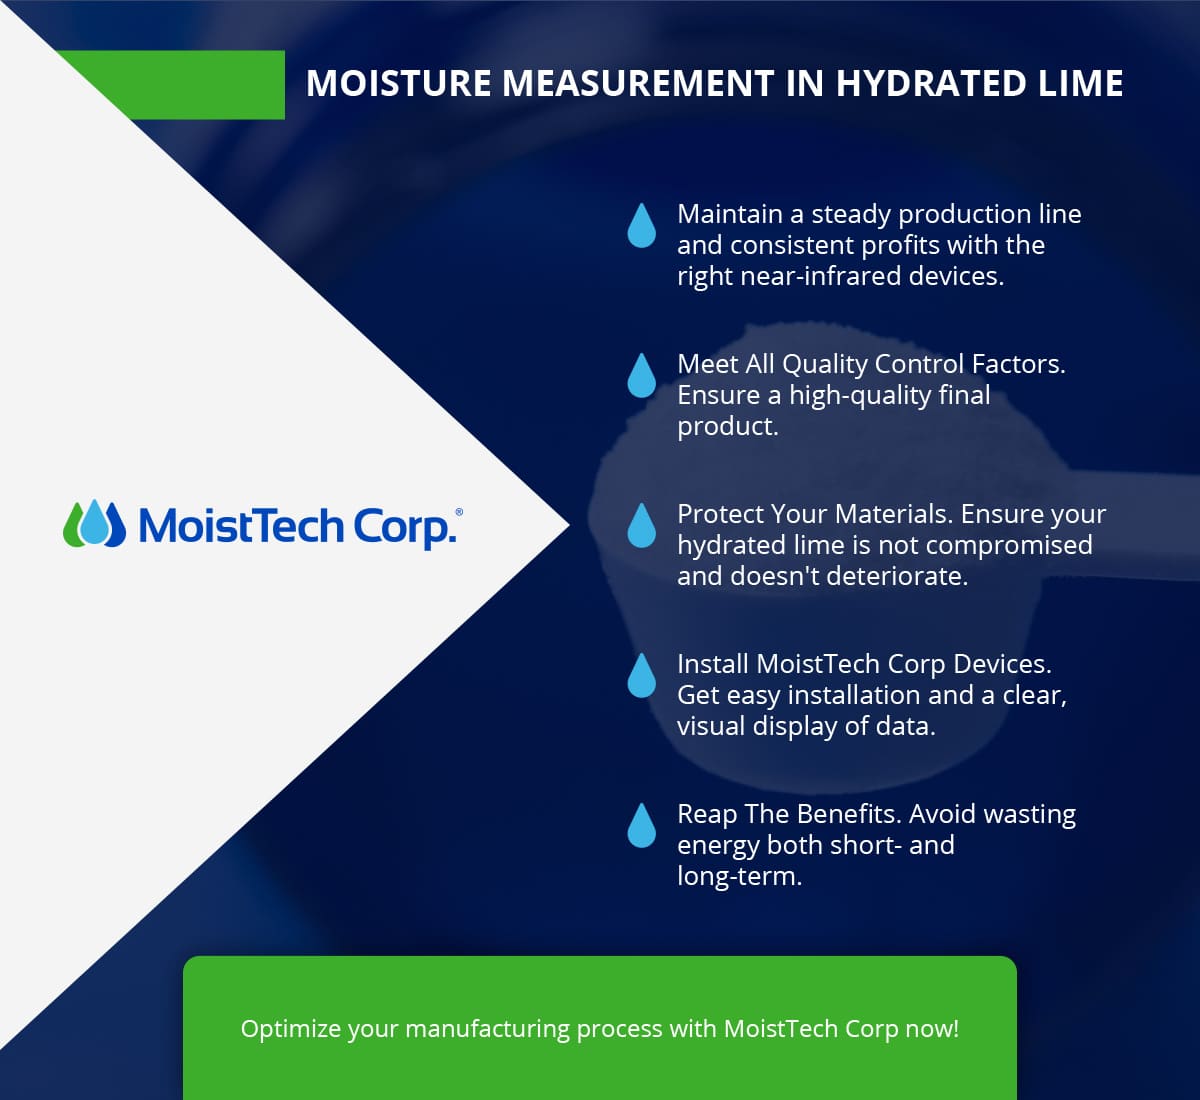 Moisture Measurement in Hydrated Lime Infographic